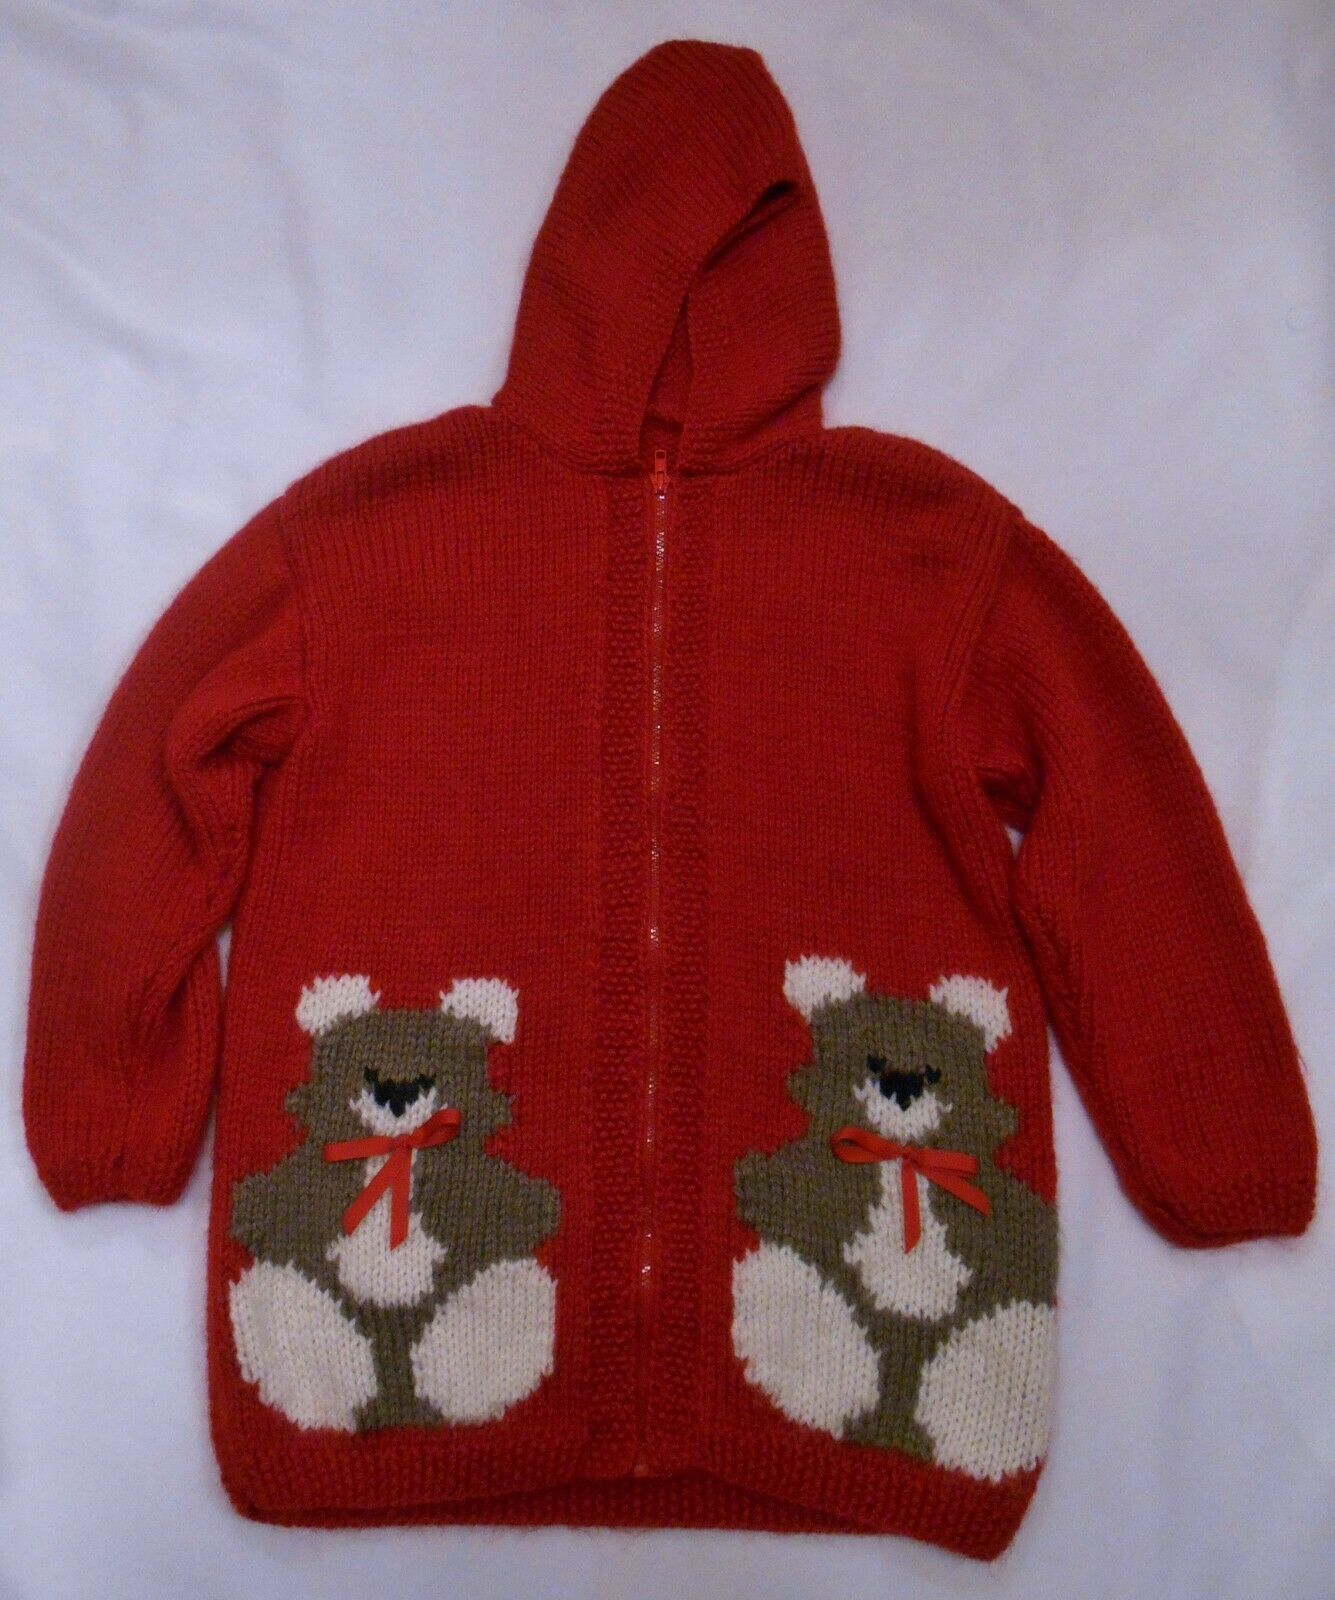 Primary image for TEDDY BEAR Women's HOODIE SWEATER Full Zip Hand Knit Red Brown Ivory S-M